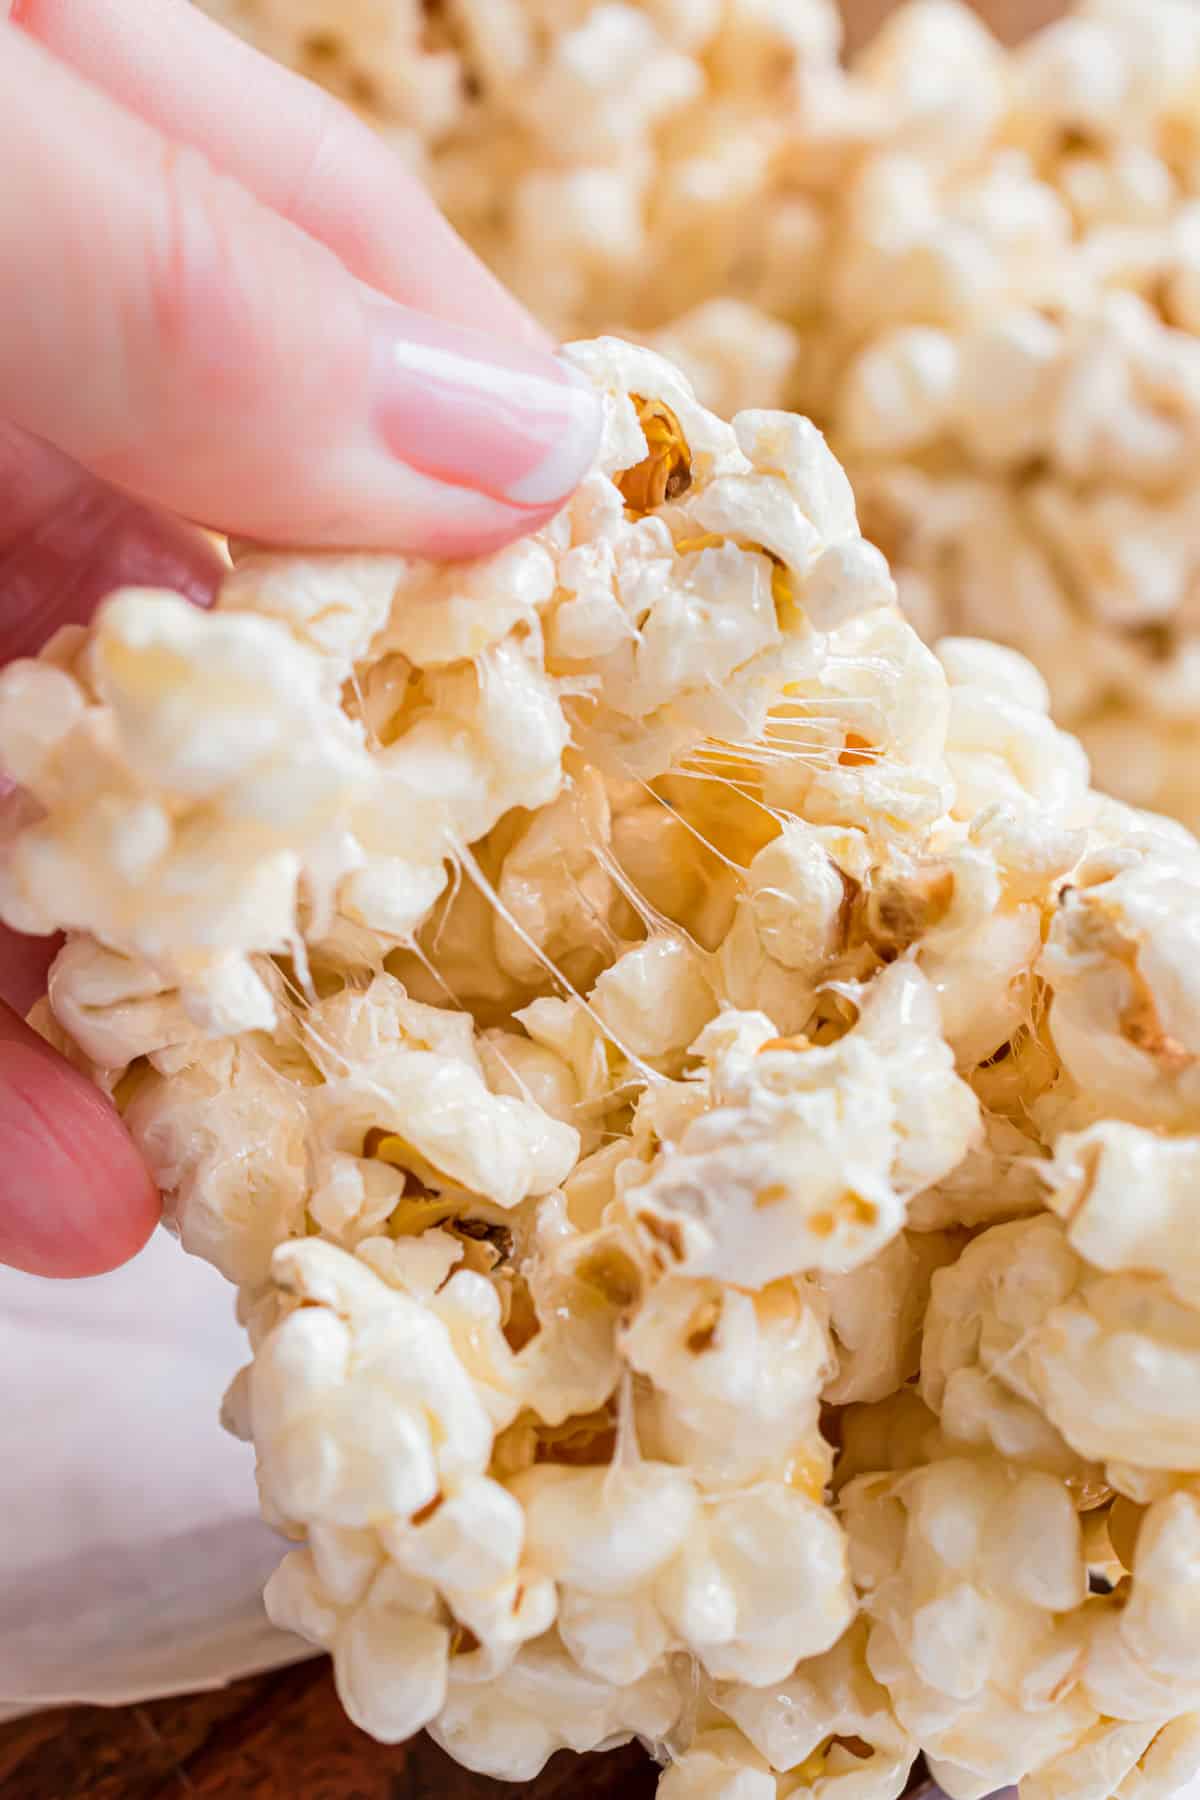 Popcorn ball being pulled in half to show chewy texture.